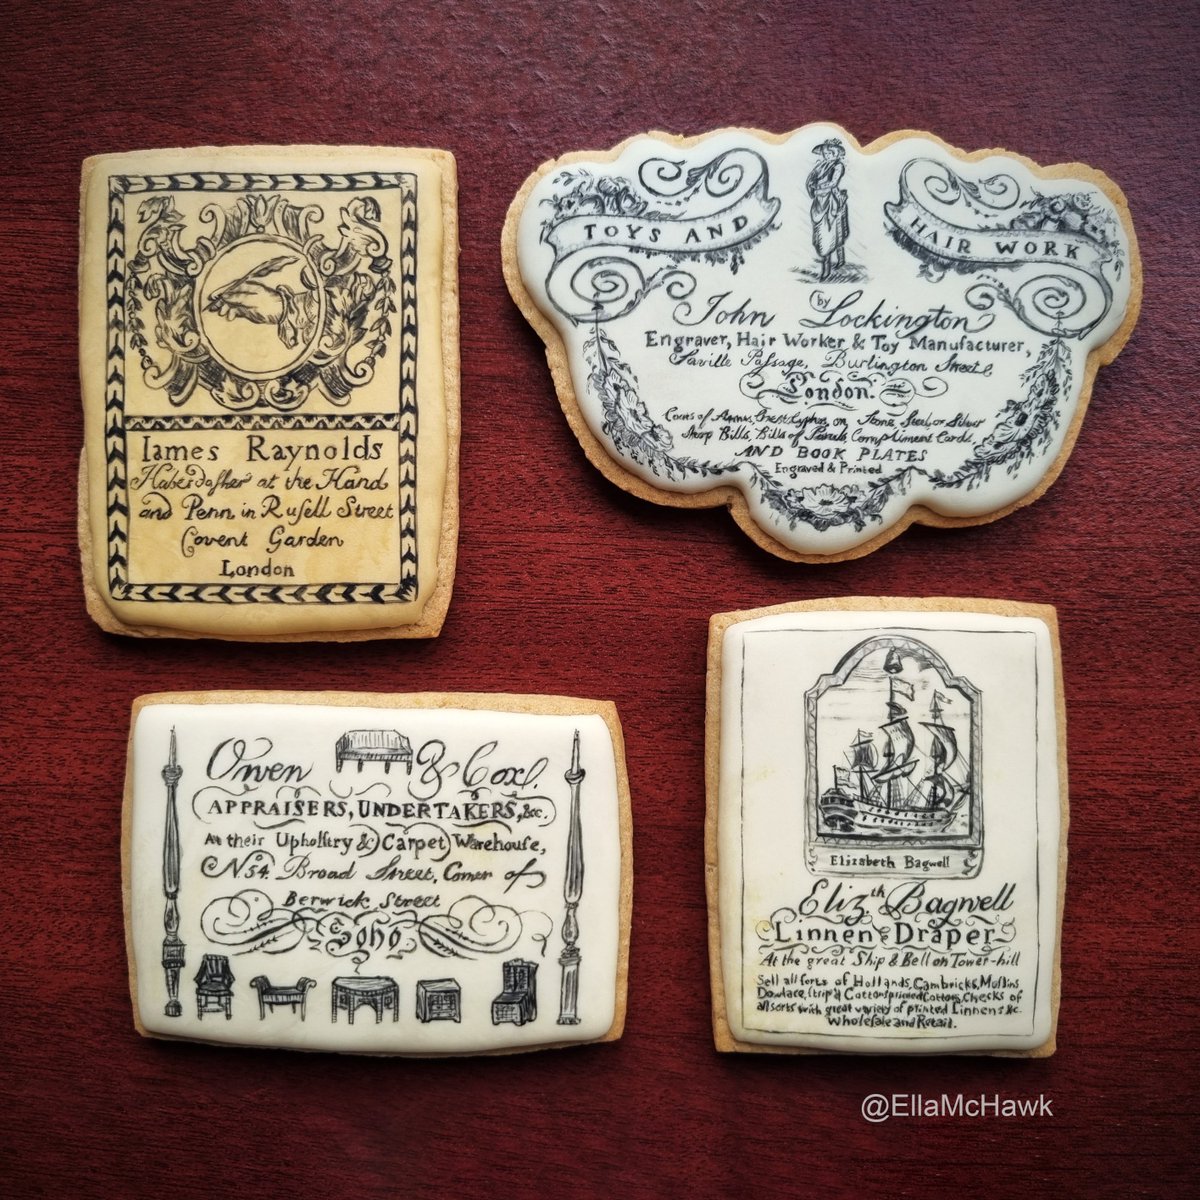 Started designing some new business cards. Got distracted by 18th-century trade cards. Made biscuit (cookie) versions of those instead. 🍪